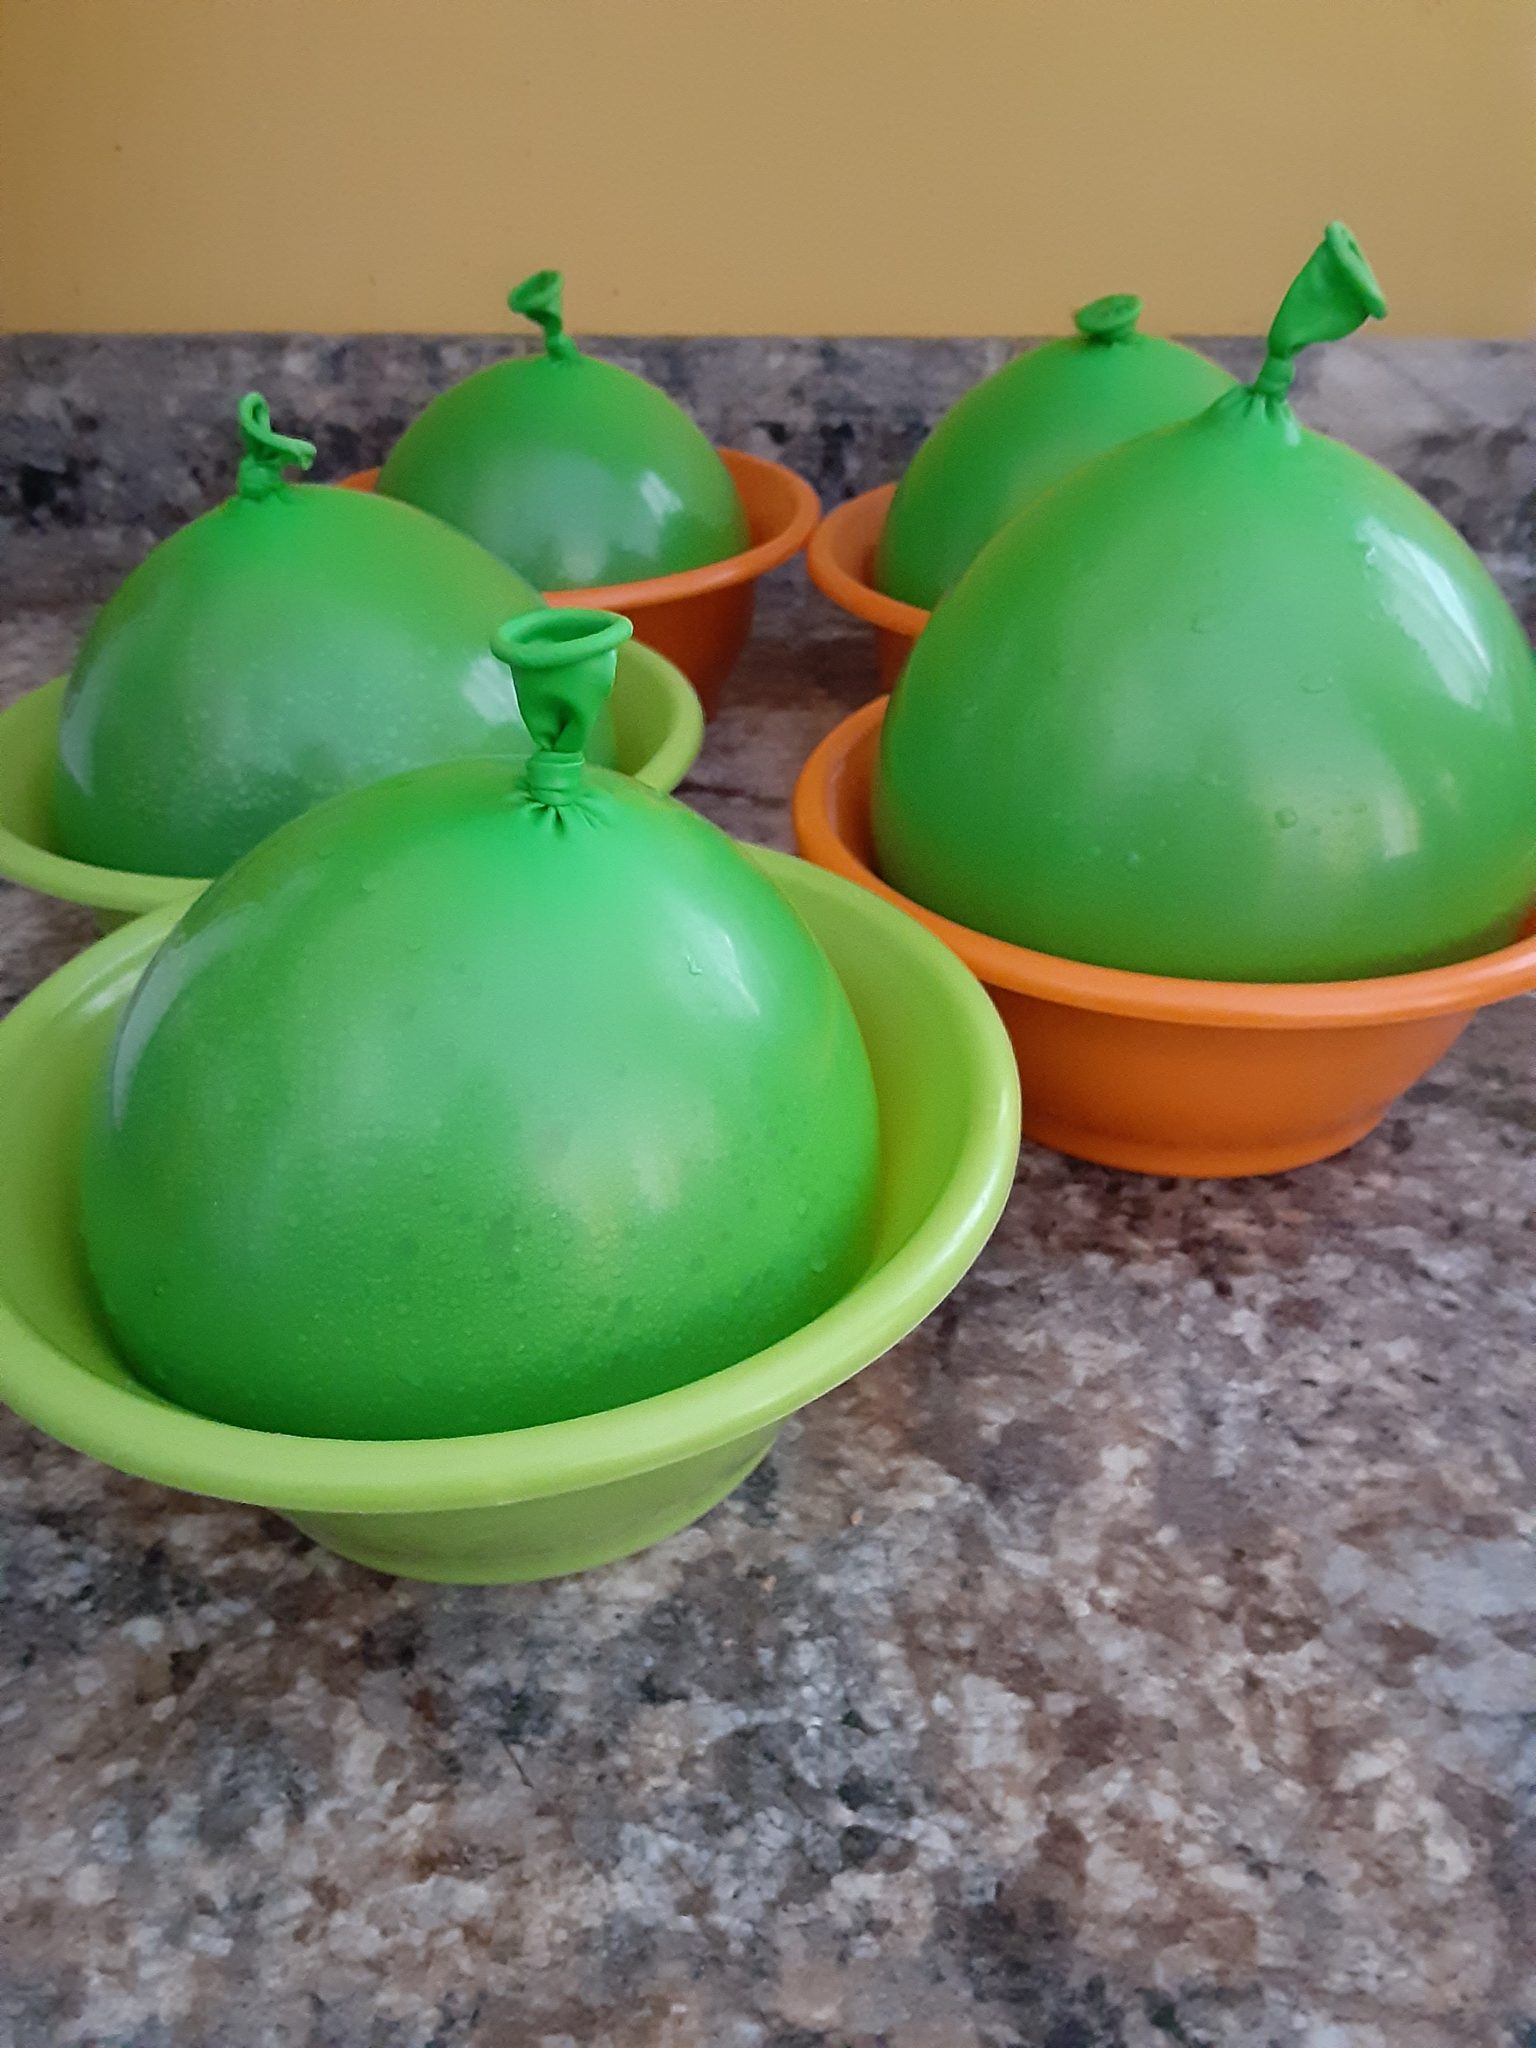 Water balloons in bowls ready